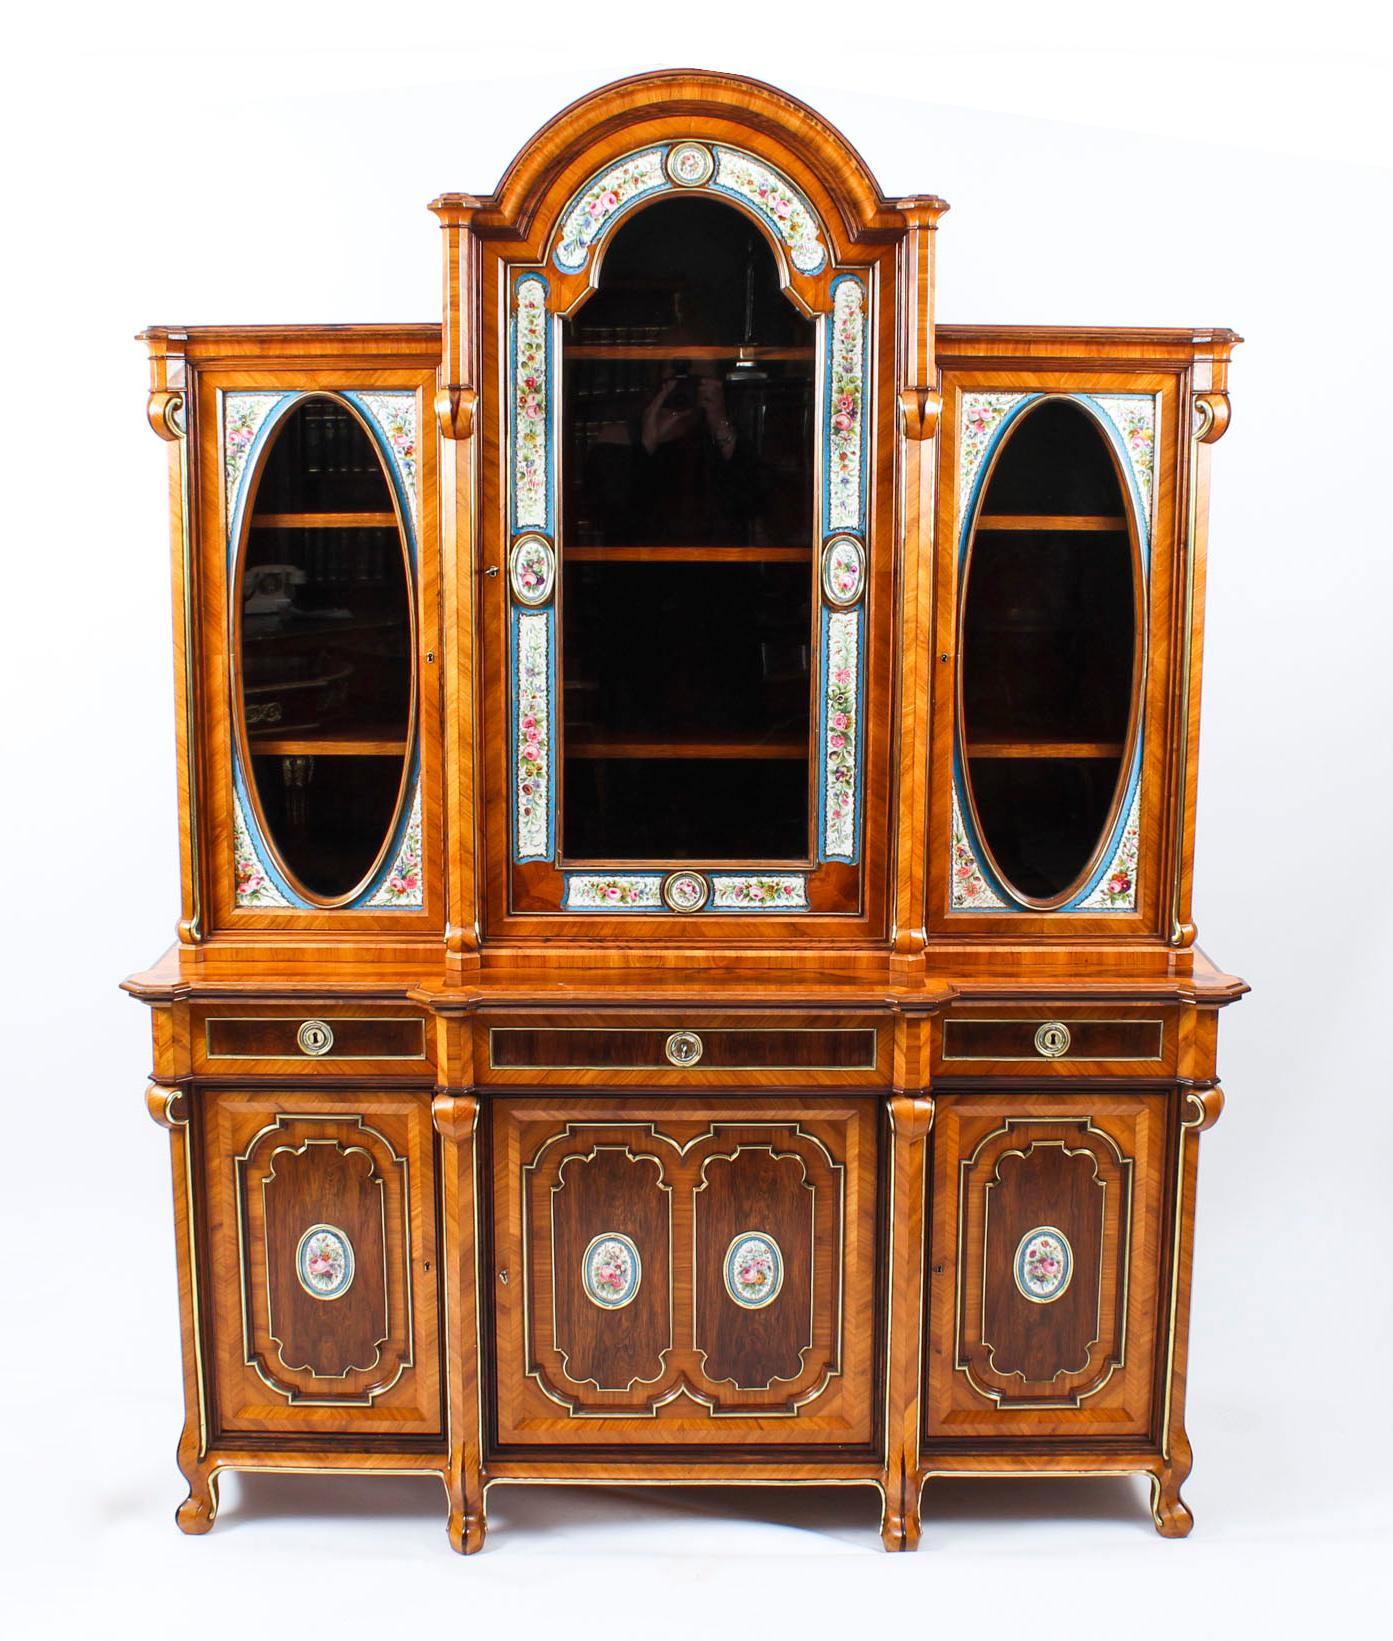 A stunning 19th century French kingwood and walnut, ormolu and Sevres porcelain mounted breakfront display cabinet. cabinet C1880 in date.

This stunning antique French side cabinet is a true rarity and has been accomplished in exotic Kingwood,